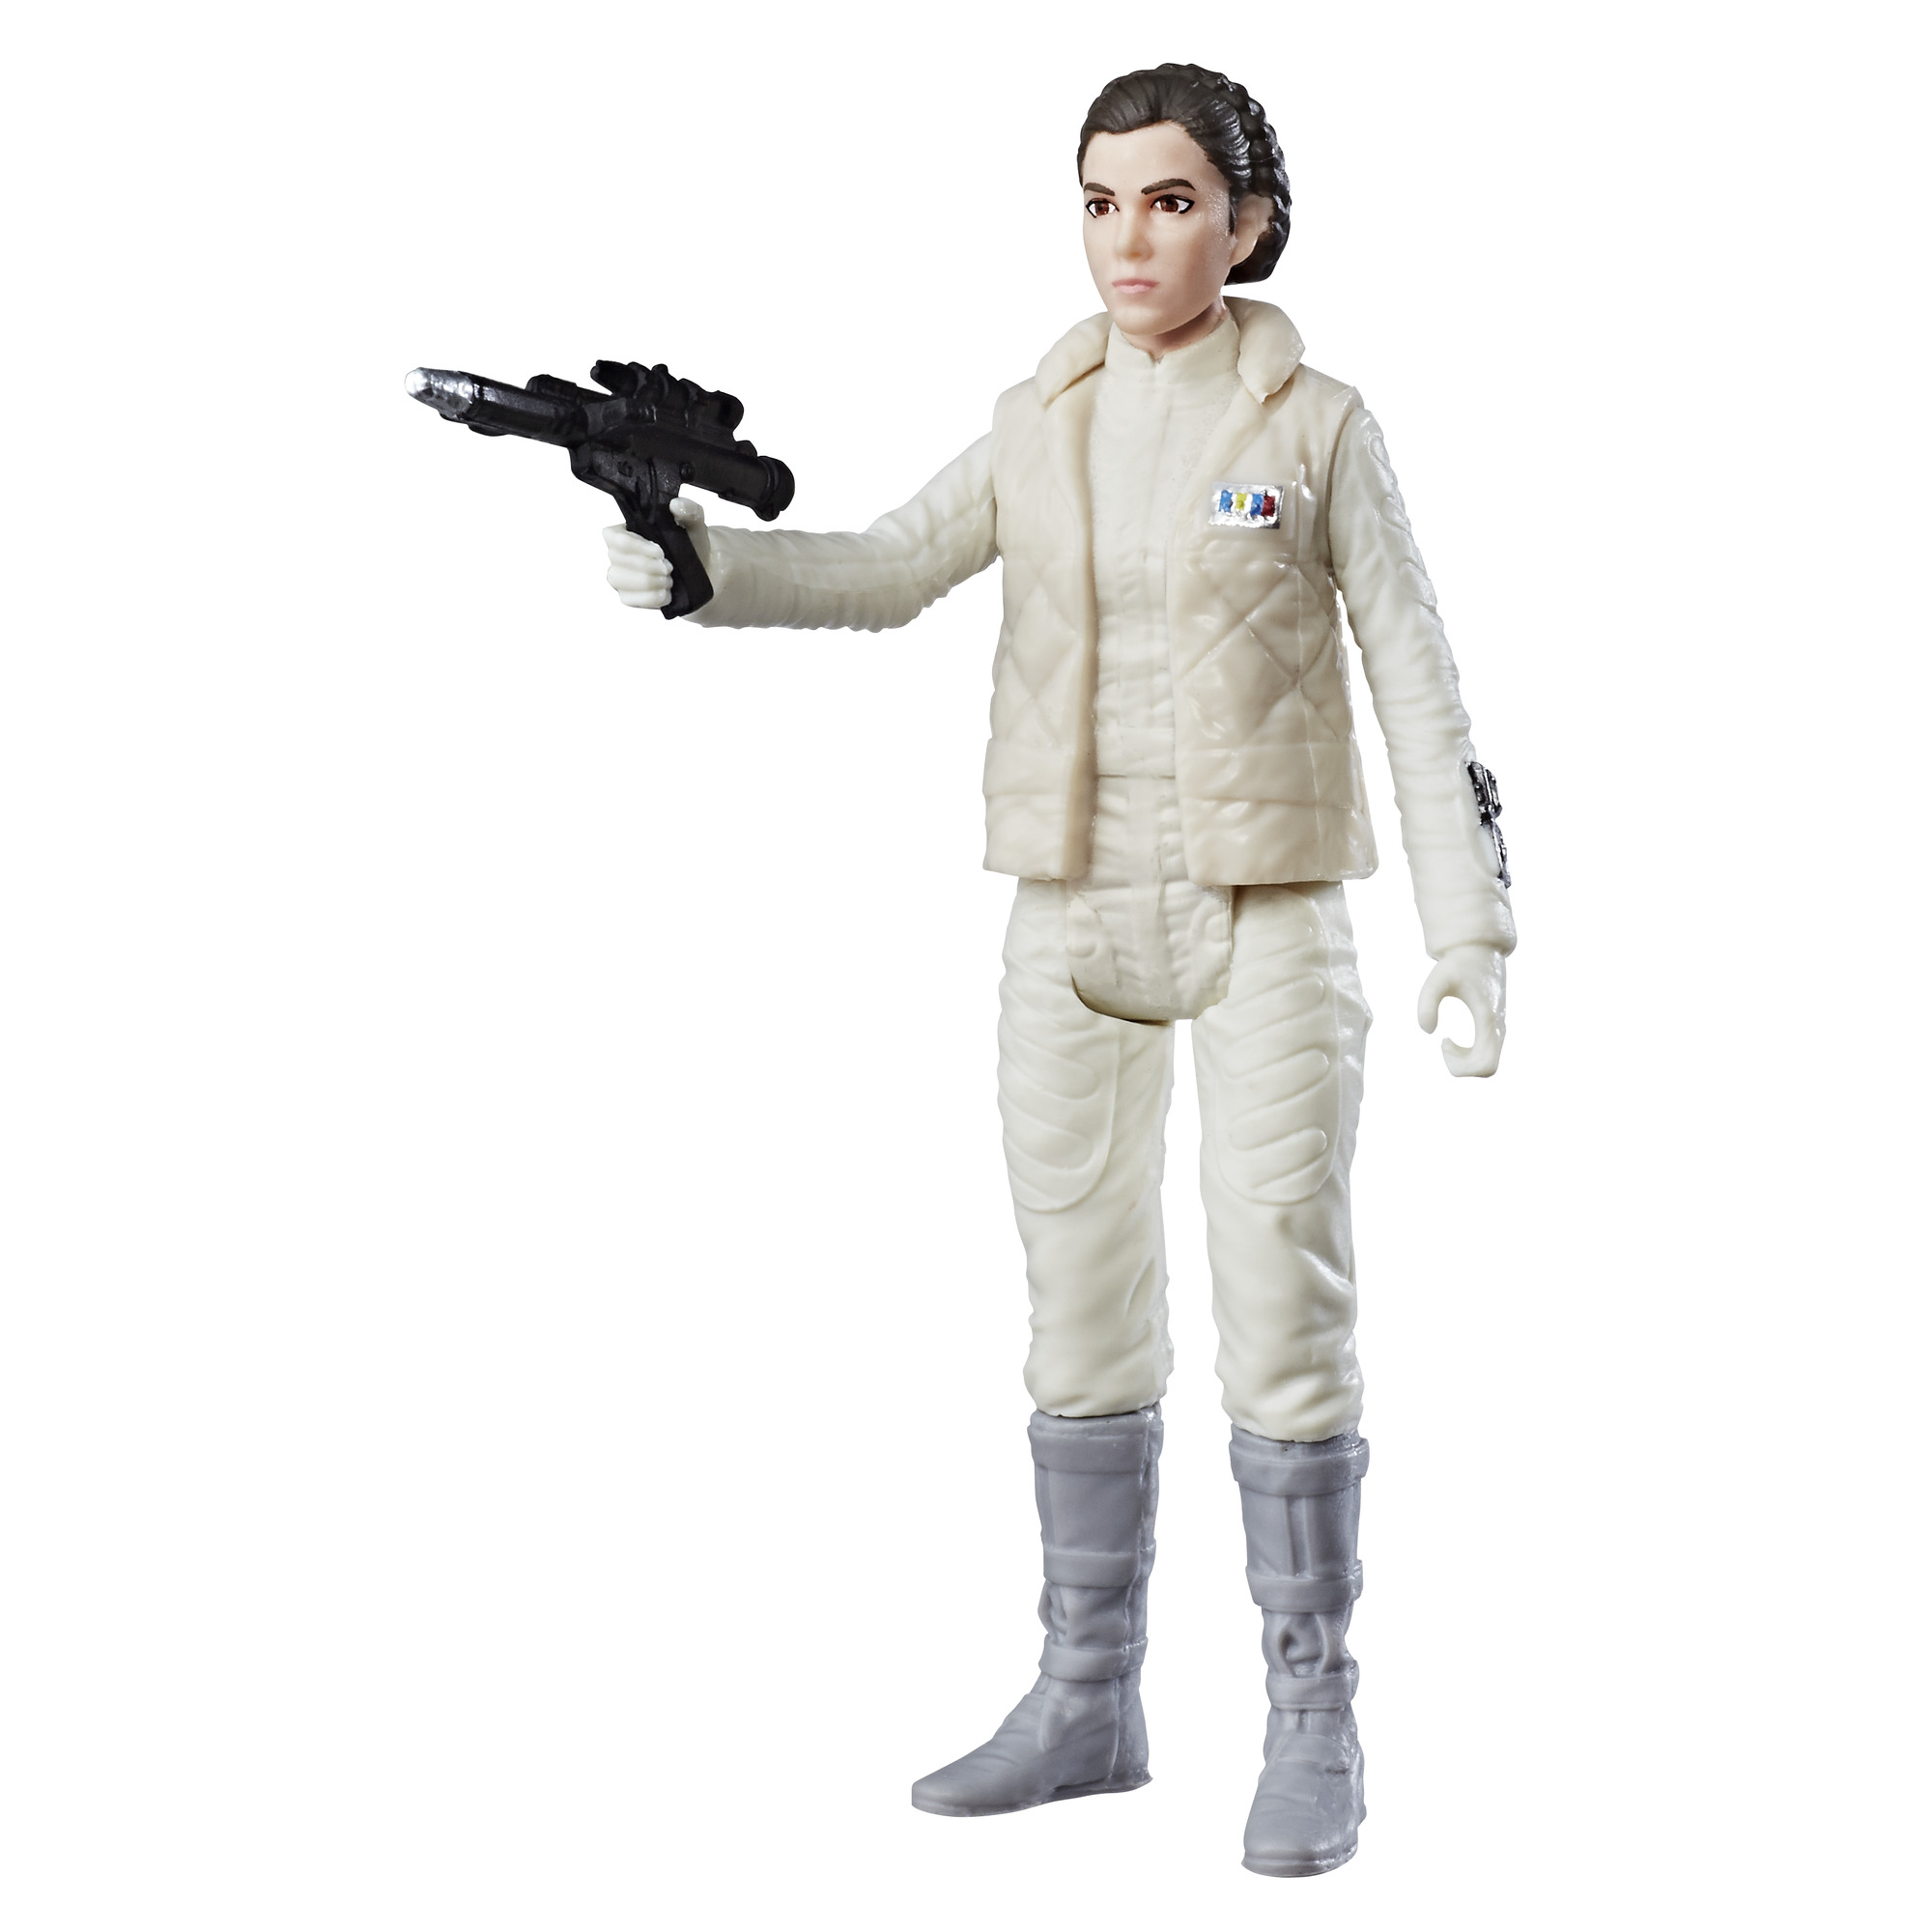 Star Wars Universe Force Link 2.0 3.75 Inch Action Figure Series 2 - Princess Leia Organa - image 2 of 2